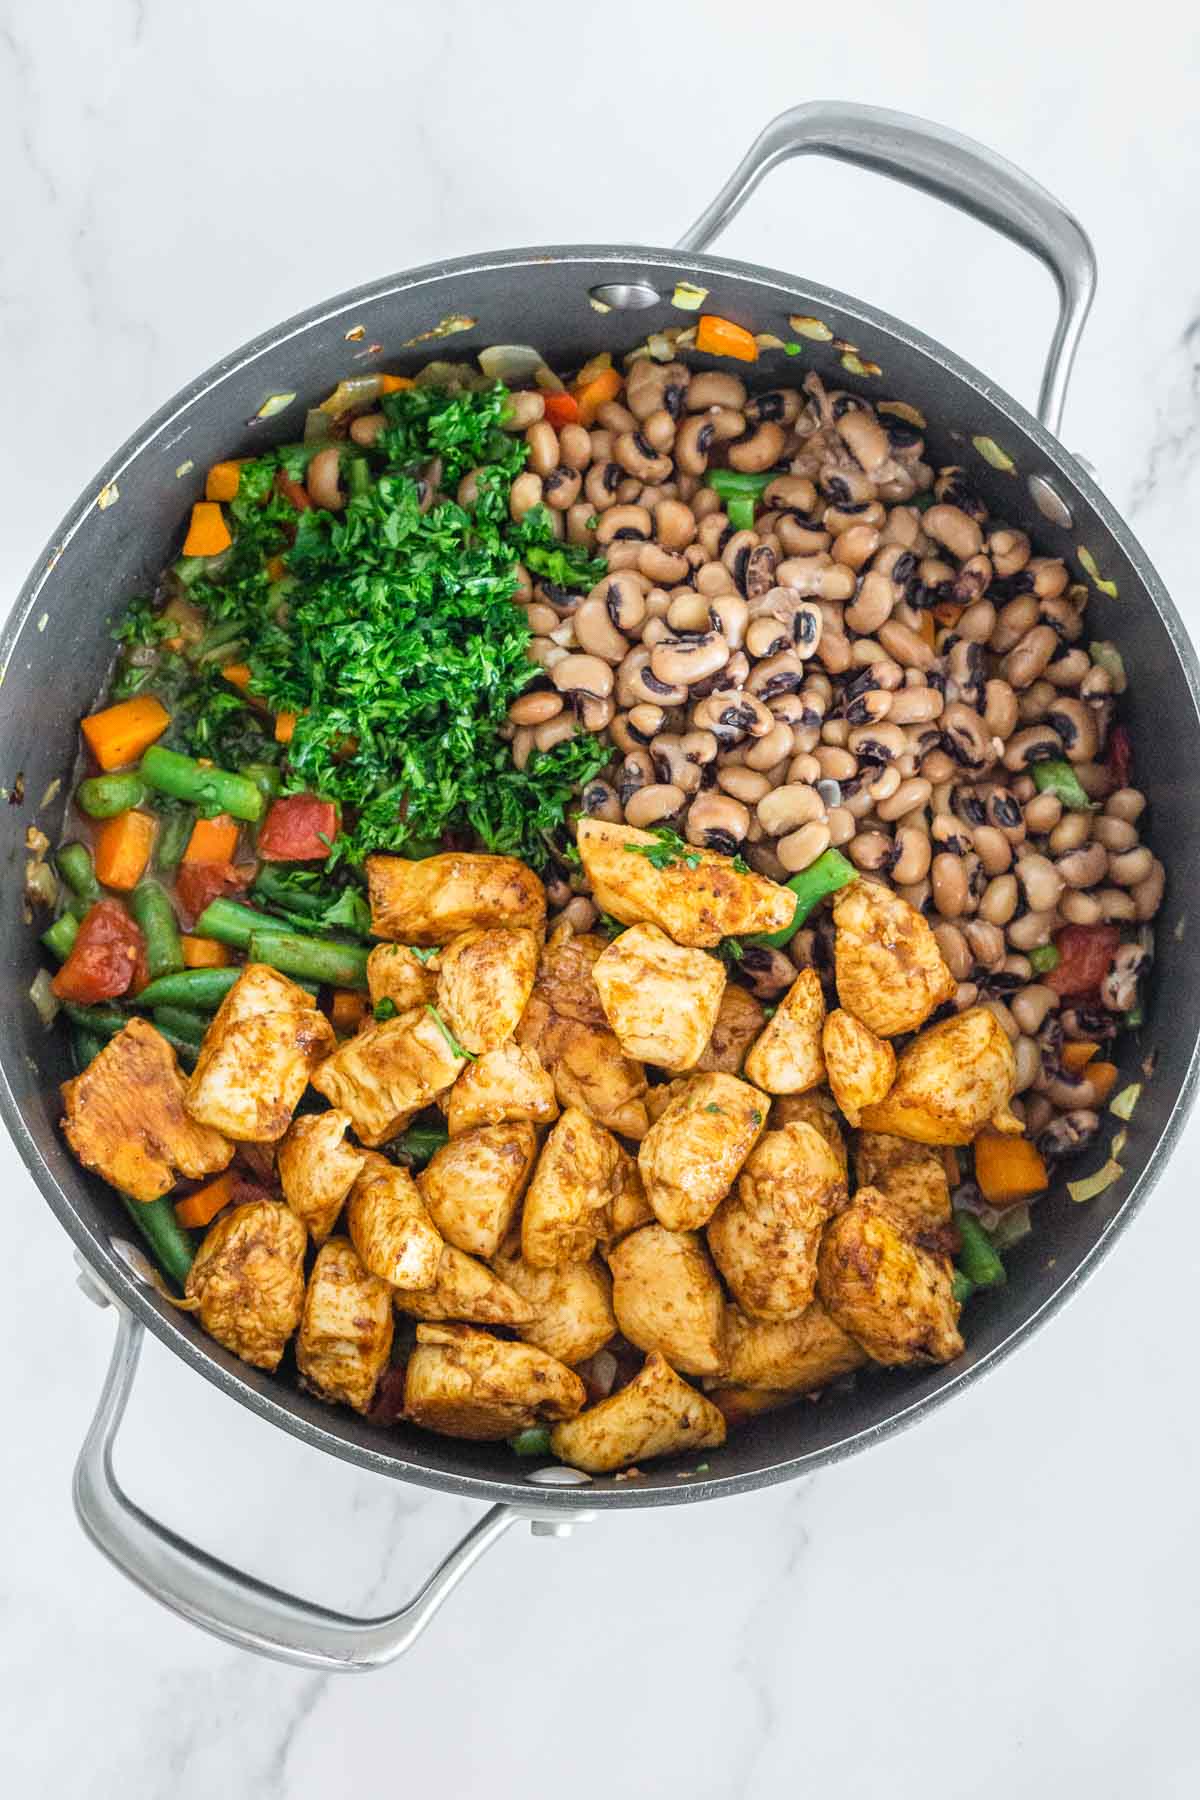 Black eyed peas, blackened chicken bites, and fresh herbs added to a pot